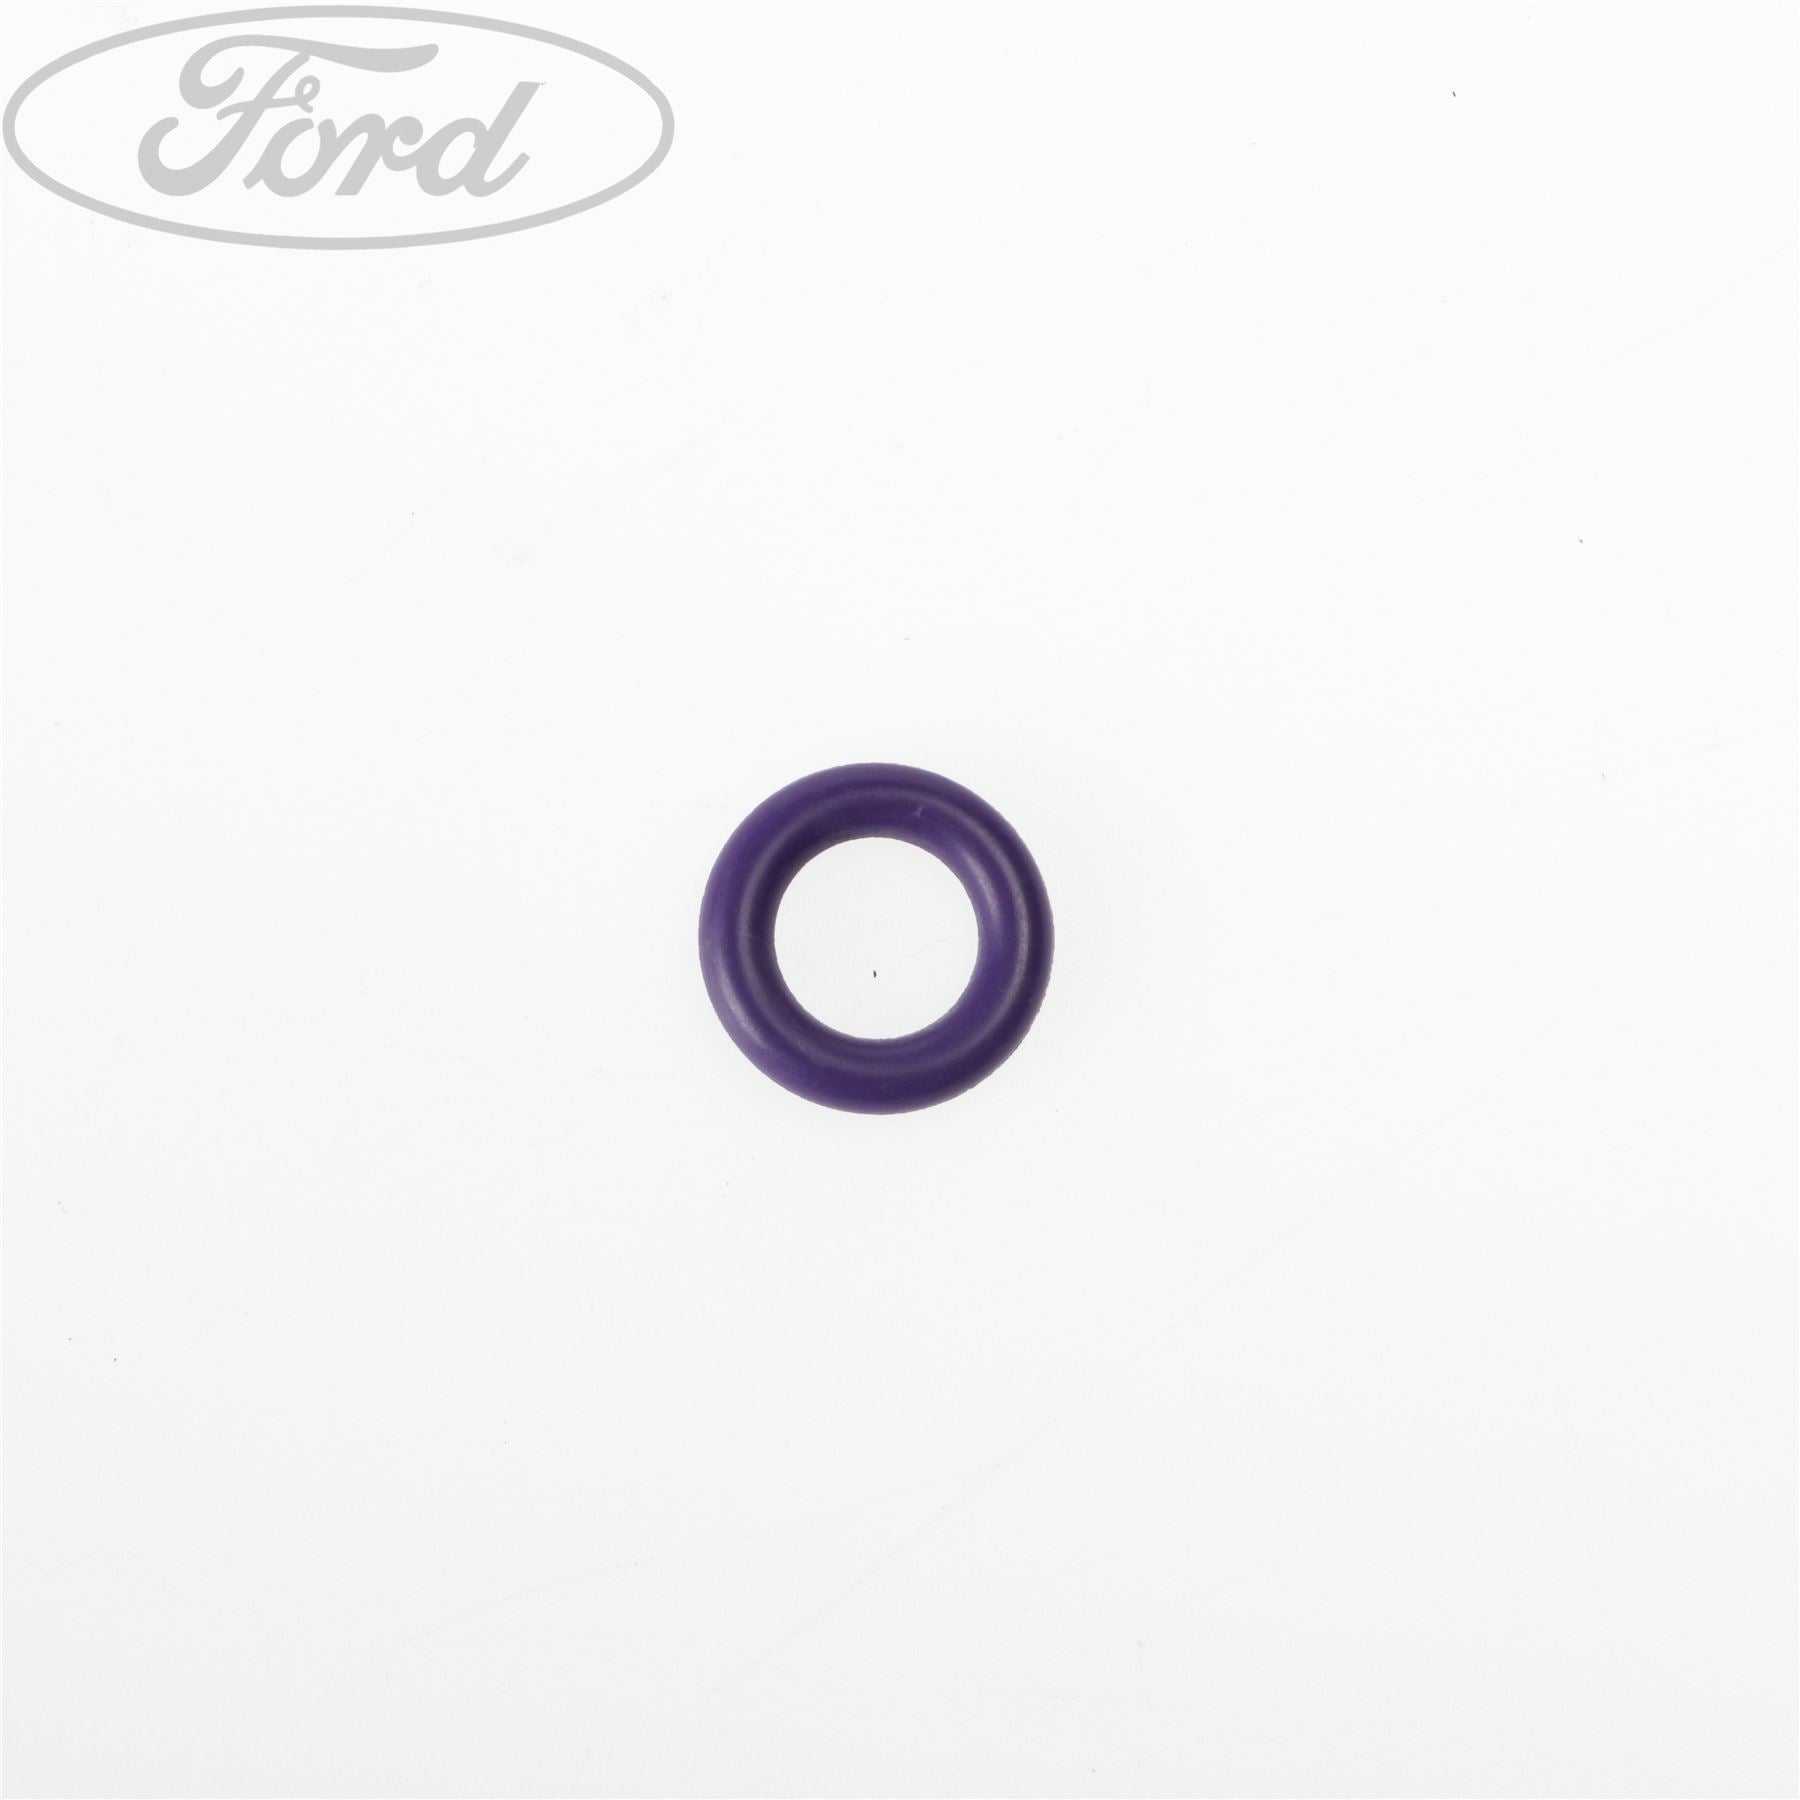 Ford, THERMOSTAT SEAL